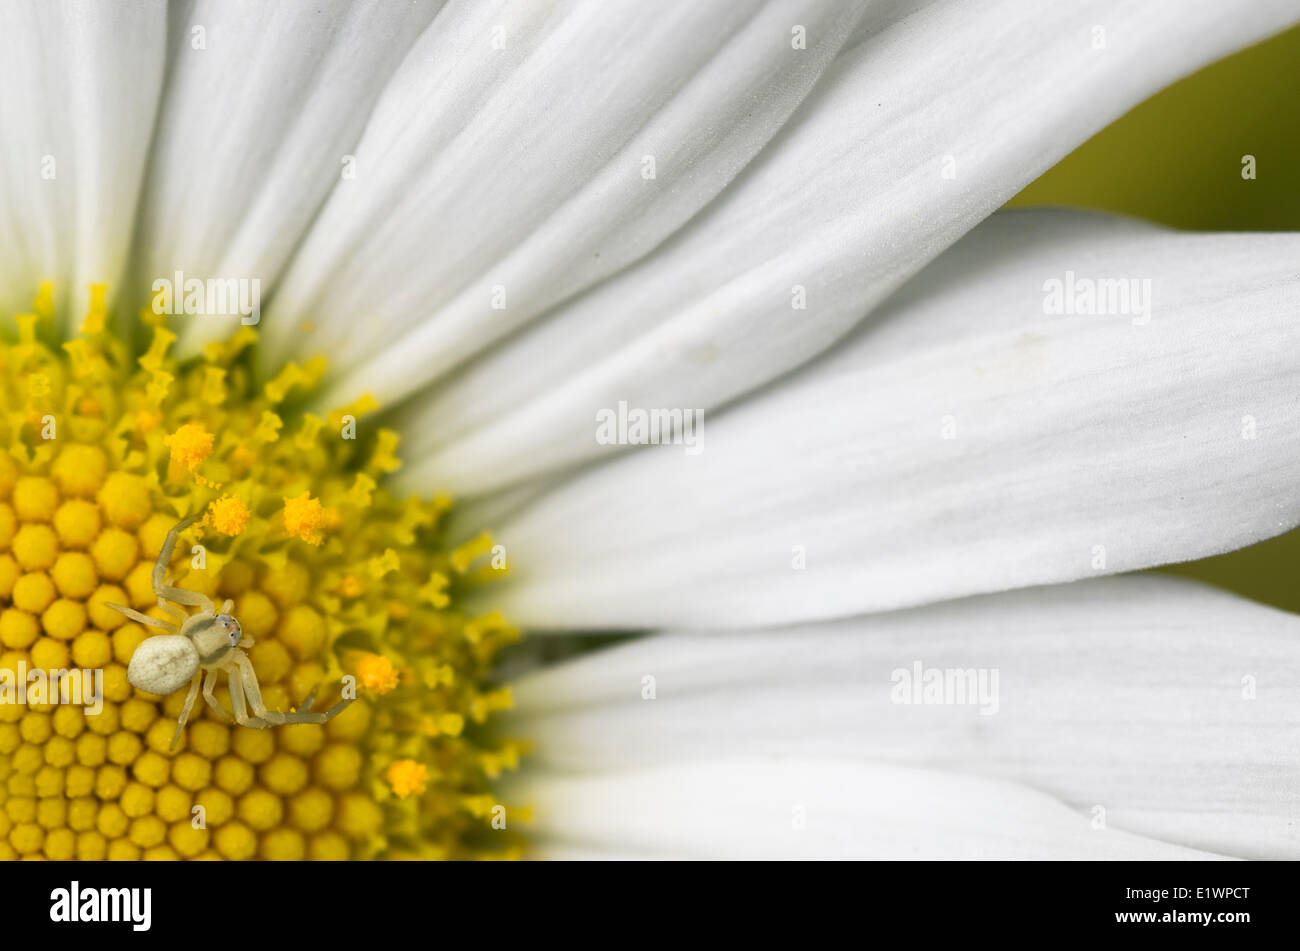 Close up of a small spider (Araneae) on a daisy flower. Stock Photo